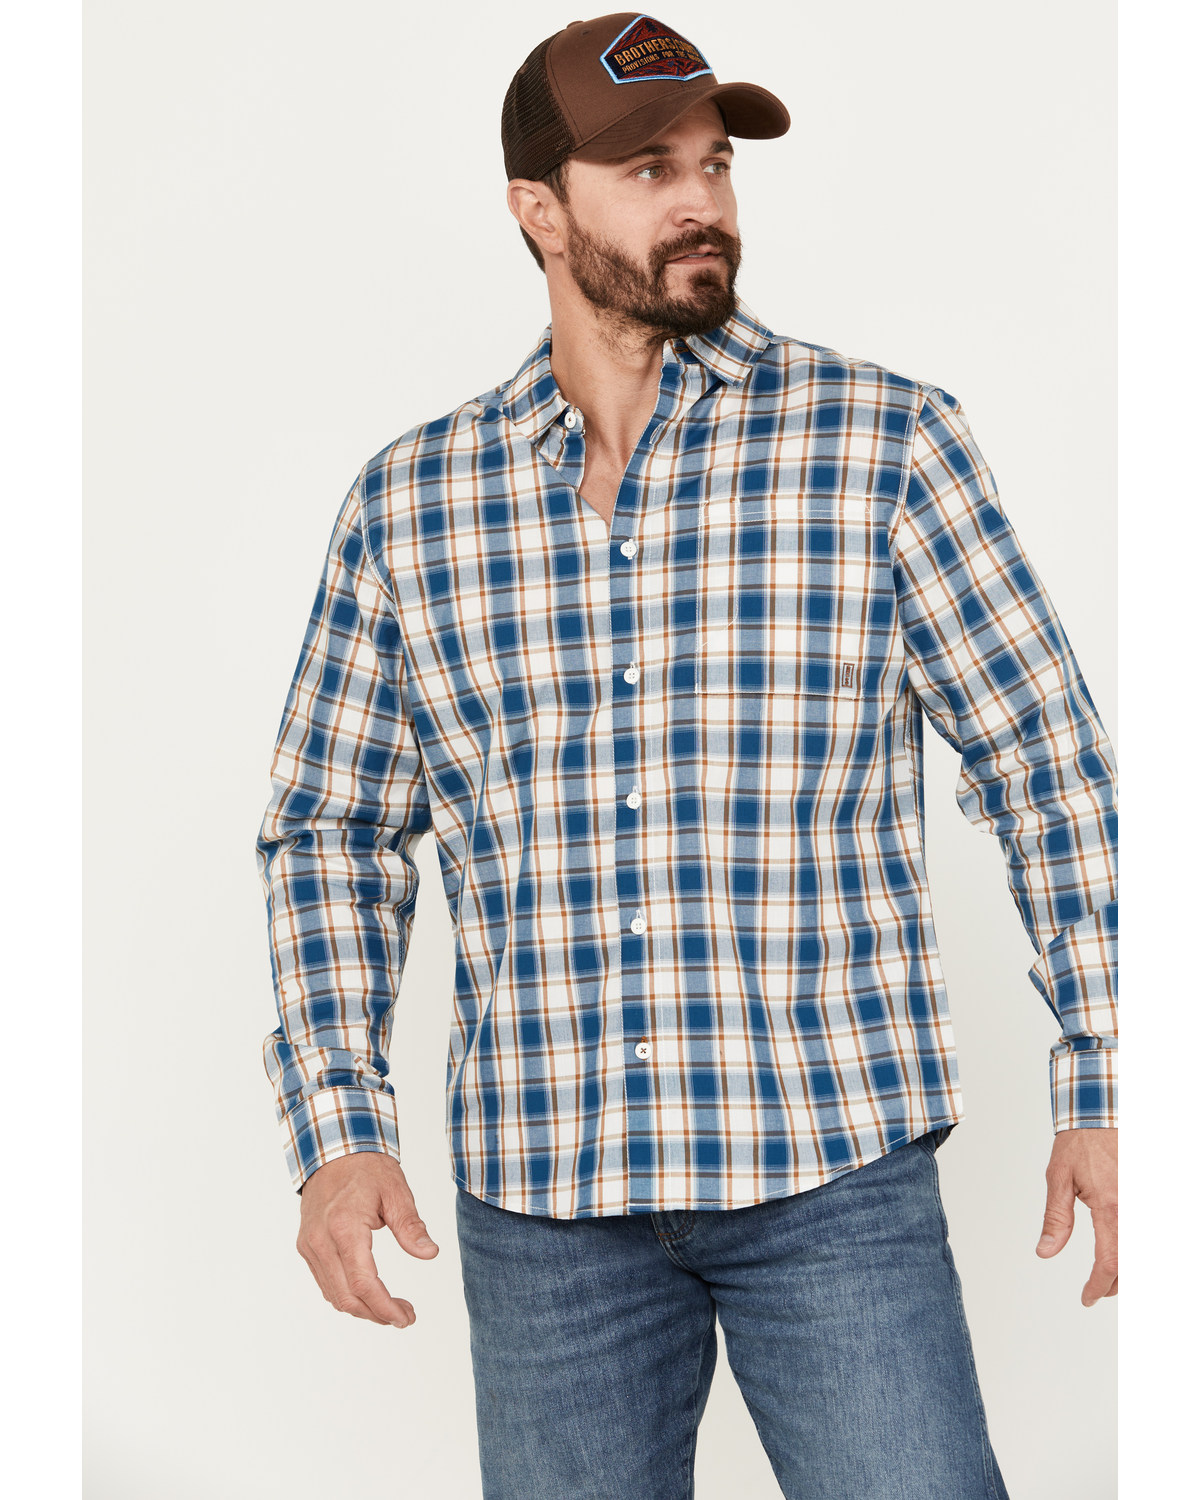 Brothers and Sons Men's Woodward Plaid Print Long Sleeve Button-Down Western Shirt